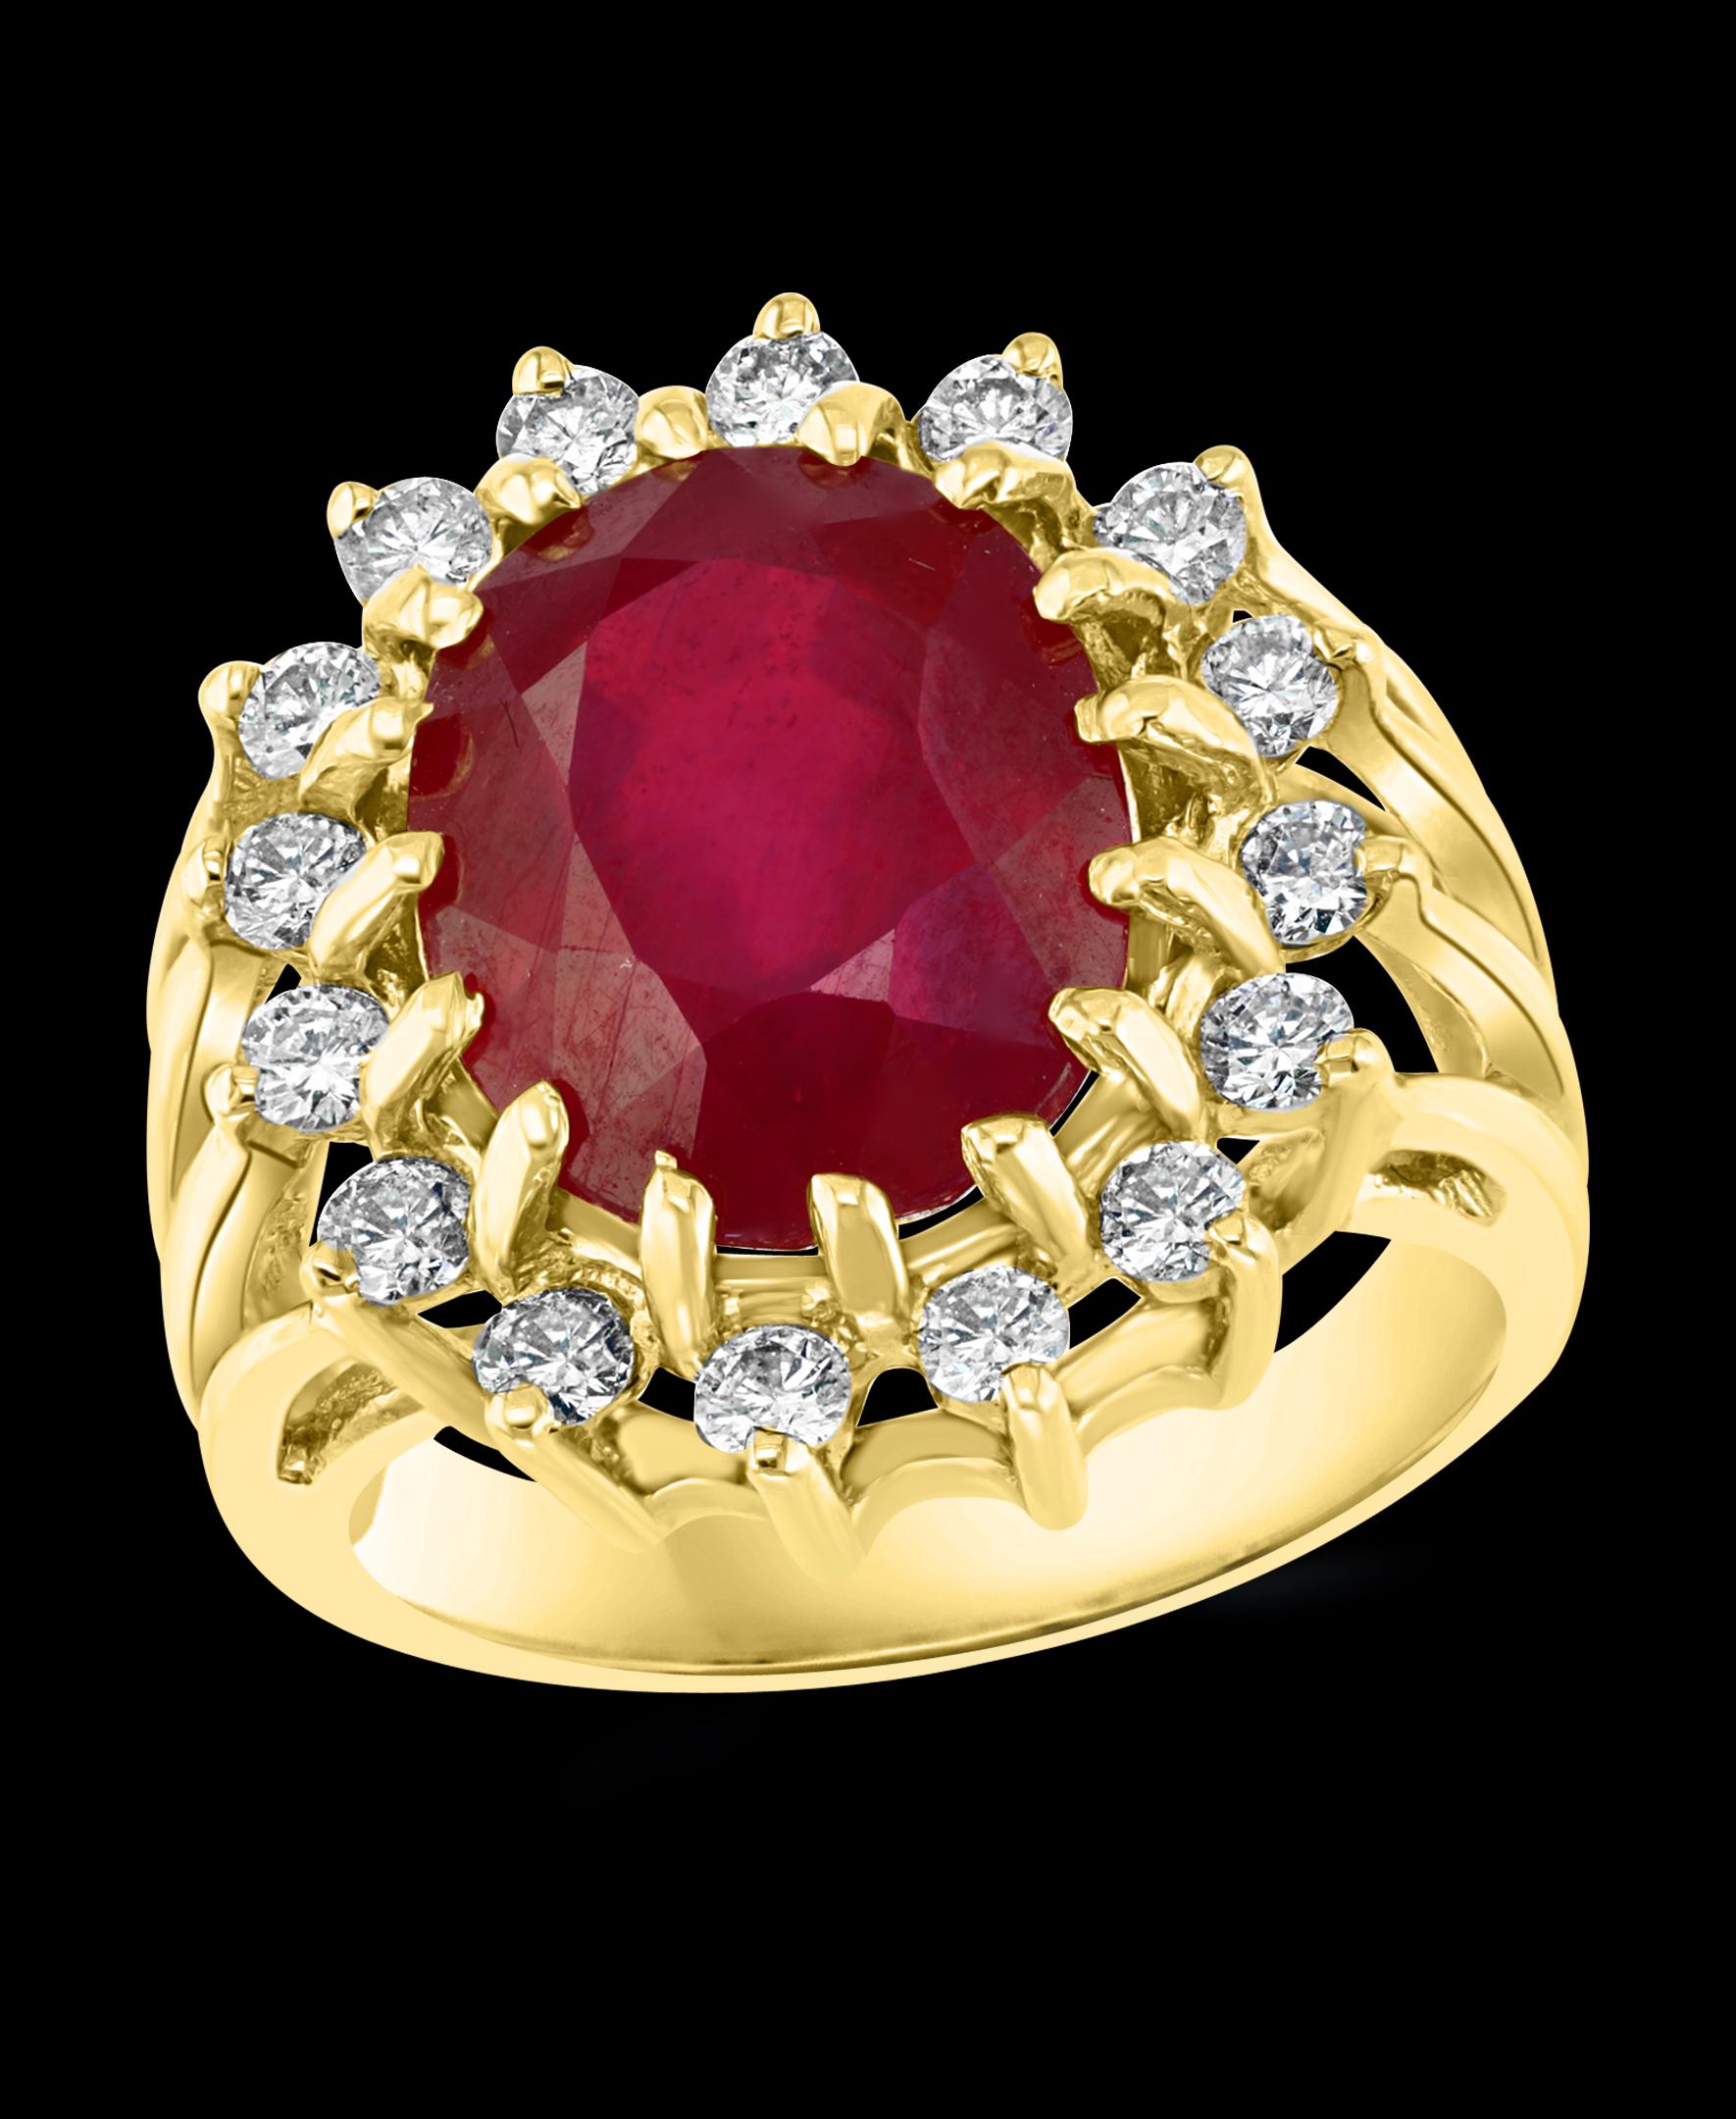 5 Carat Treated Ruby And Diamond 14 Karat Yellow Gold Ring Size 6
 prong set
14 K Yellow Gold: 8  gram
Stamped 14K
Ring Size 6 ( can be altered for no charge )
Large 5 carat oval shape ruby Treated surrounded by brilliant cut diamonds .
Diamonds: 